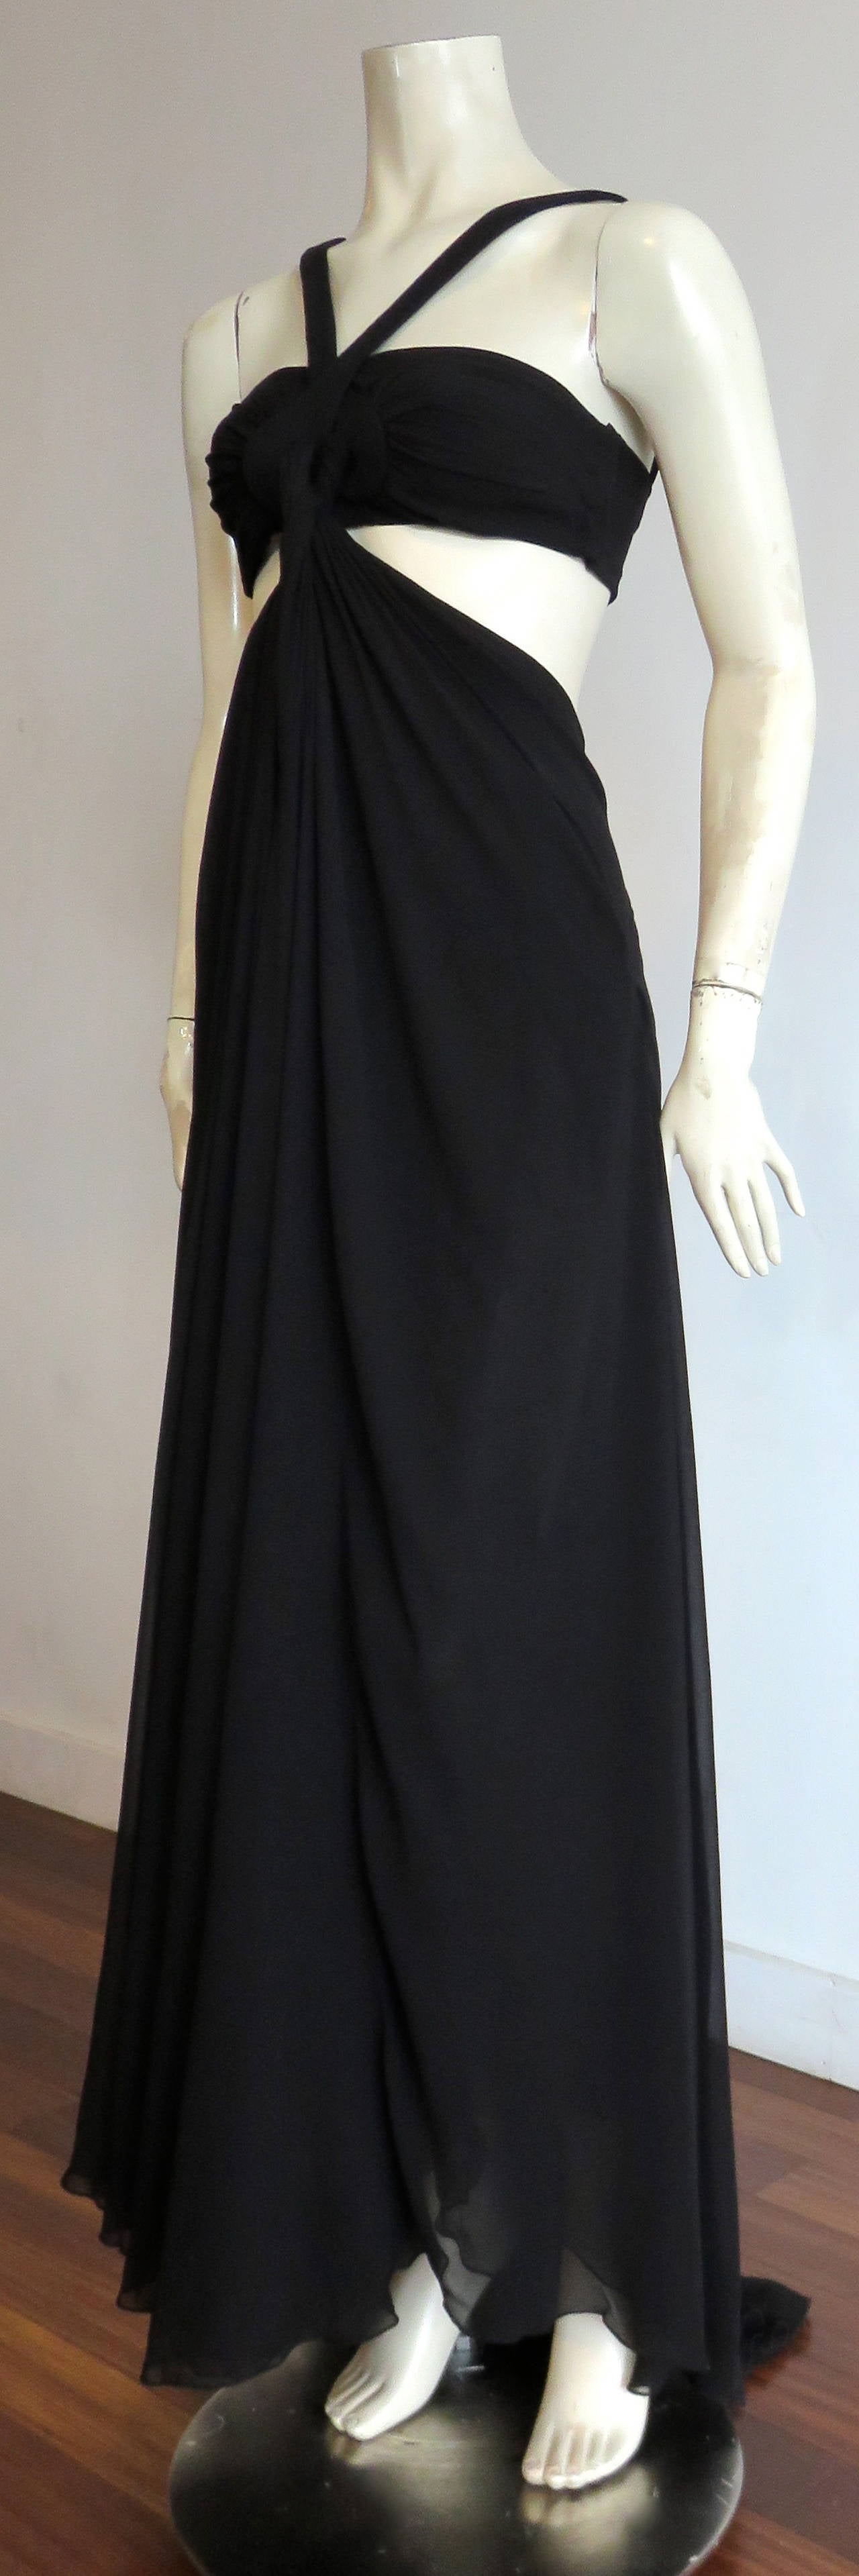 Women's GUCCI by Tom Ford Black silk twisted drape cut-out dress - NWT For Sale